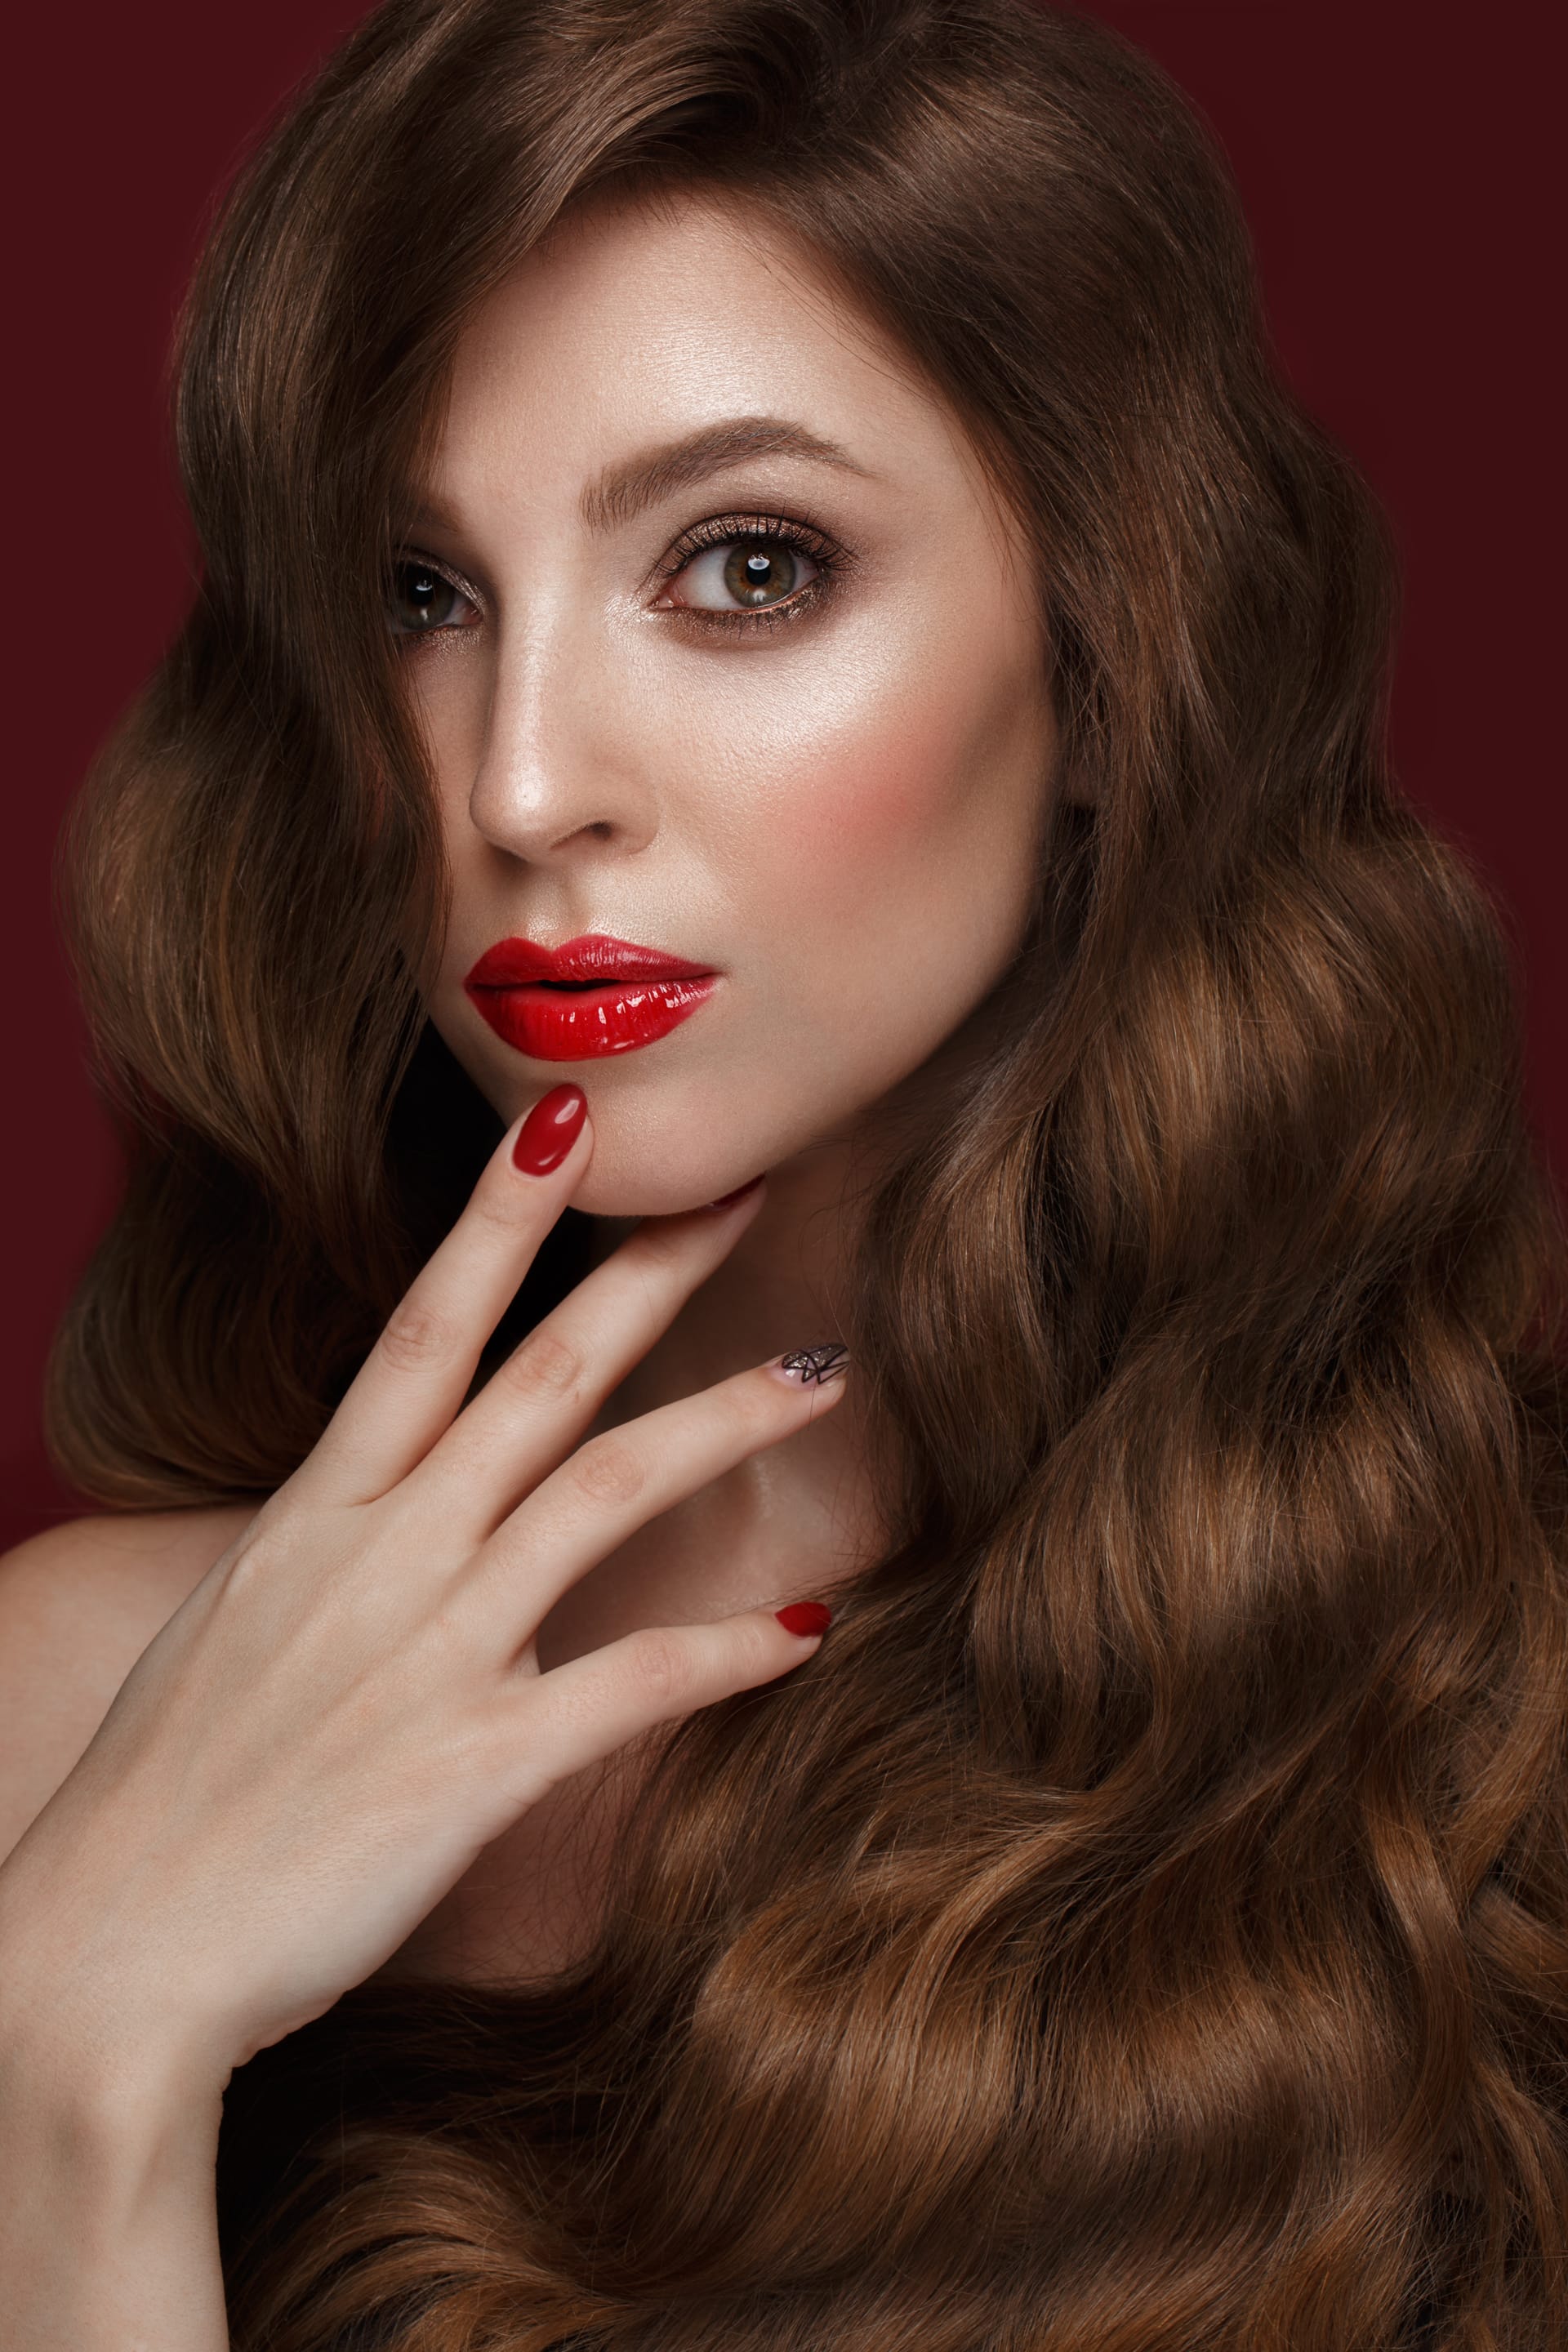 Woman with classic make up curls hair red nails